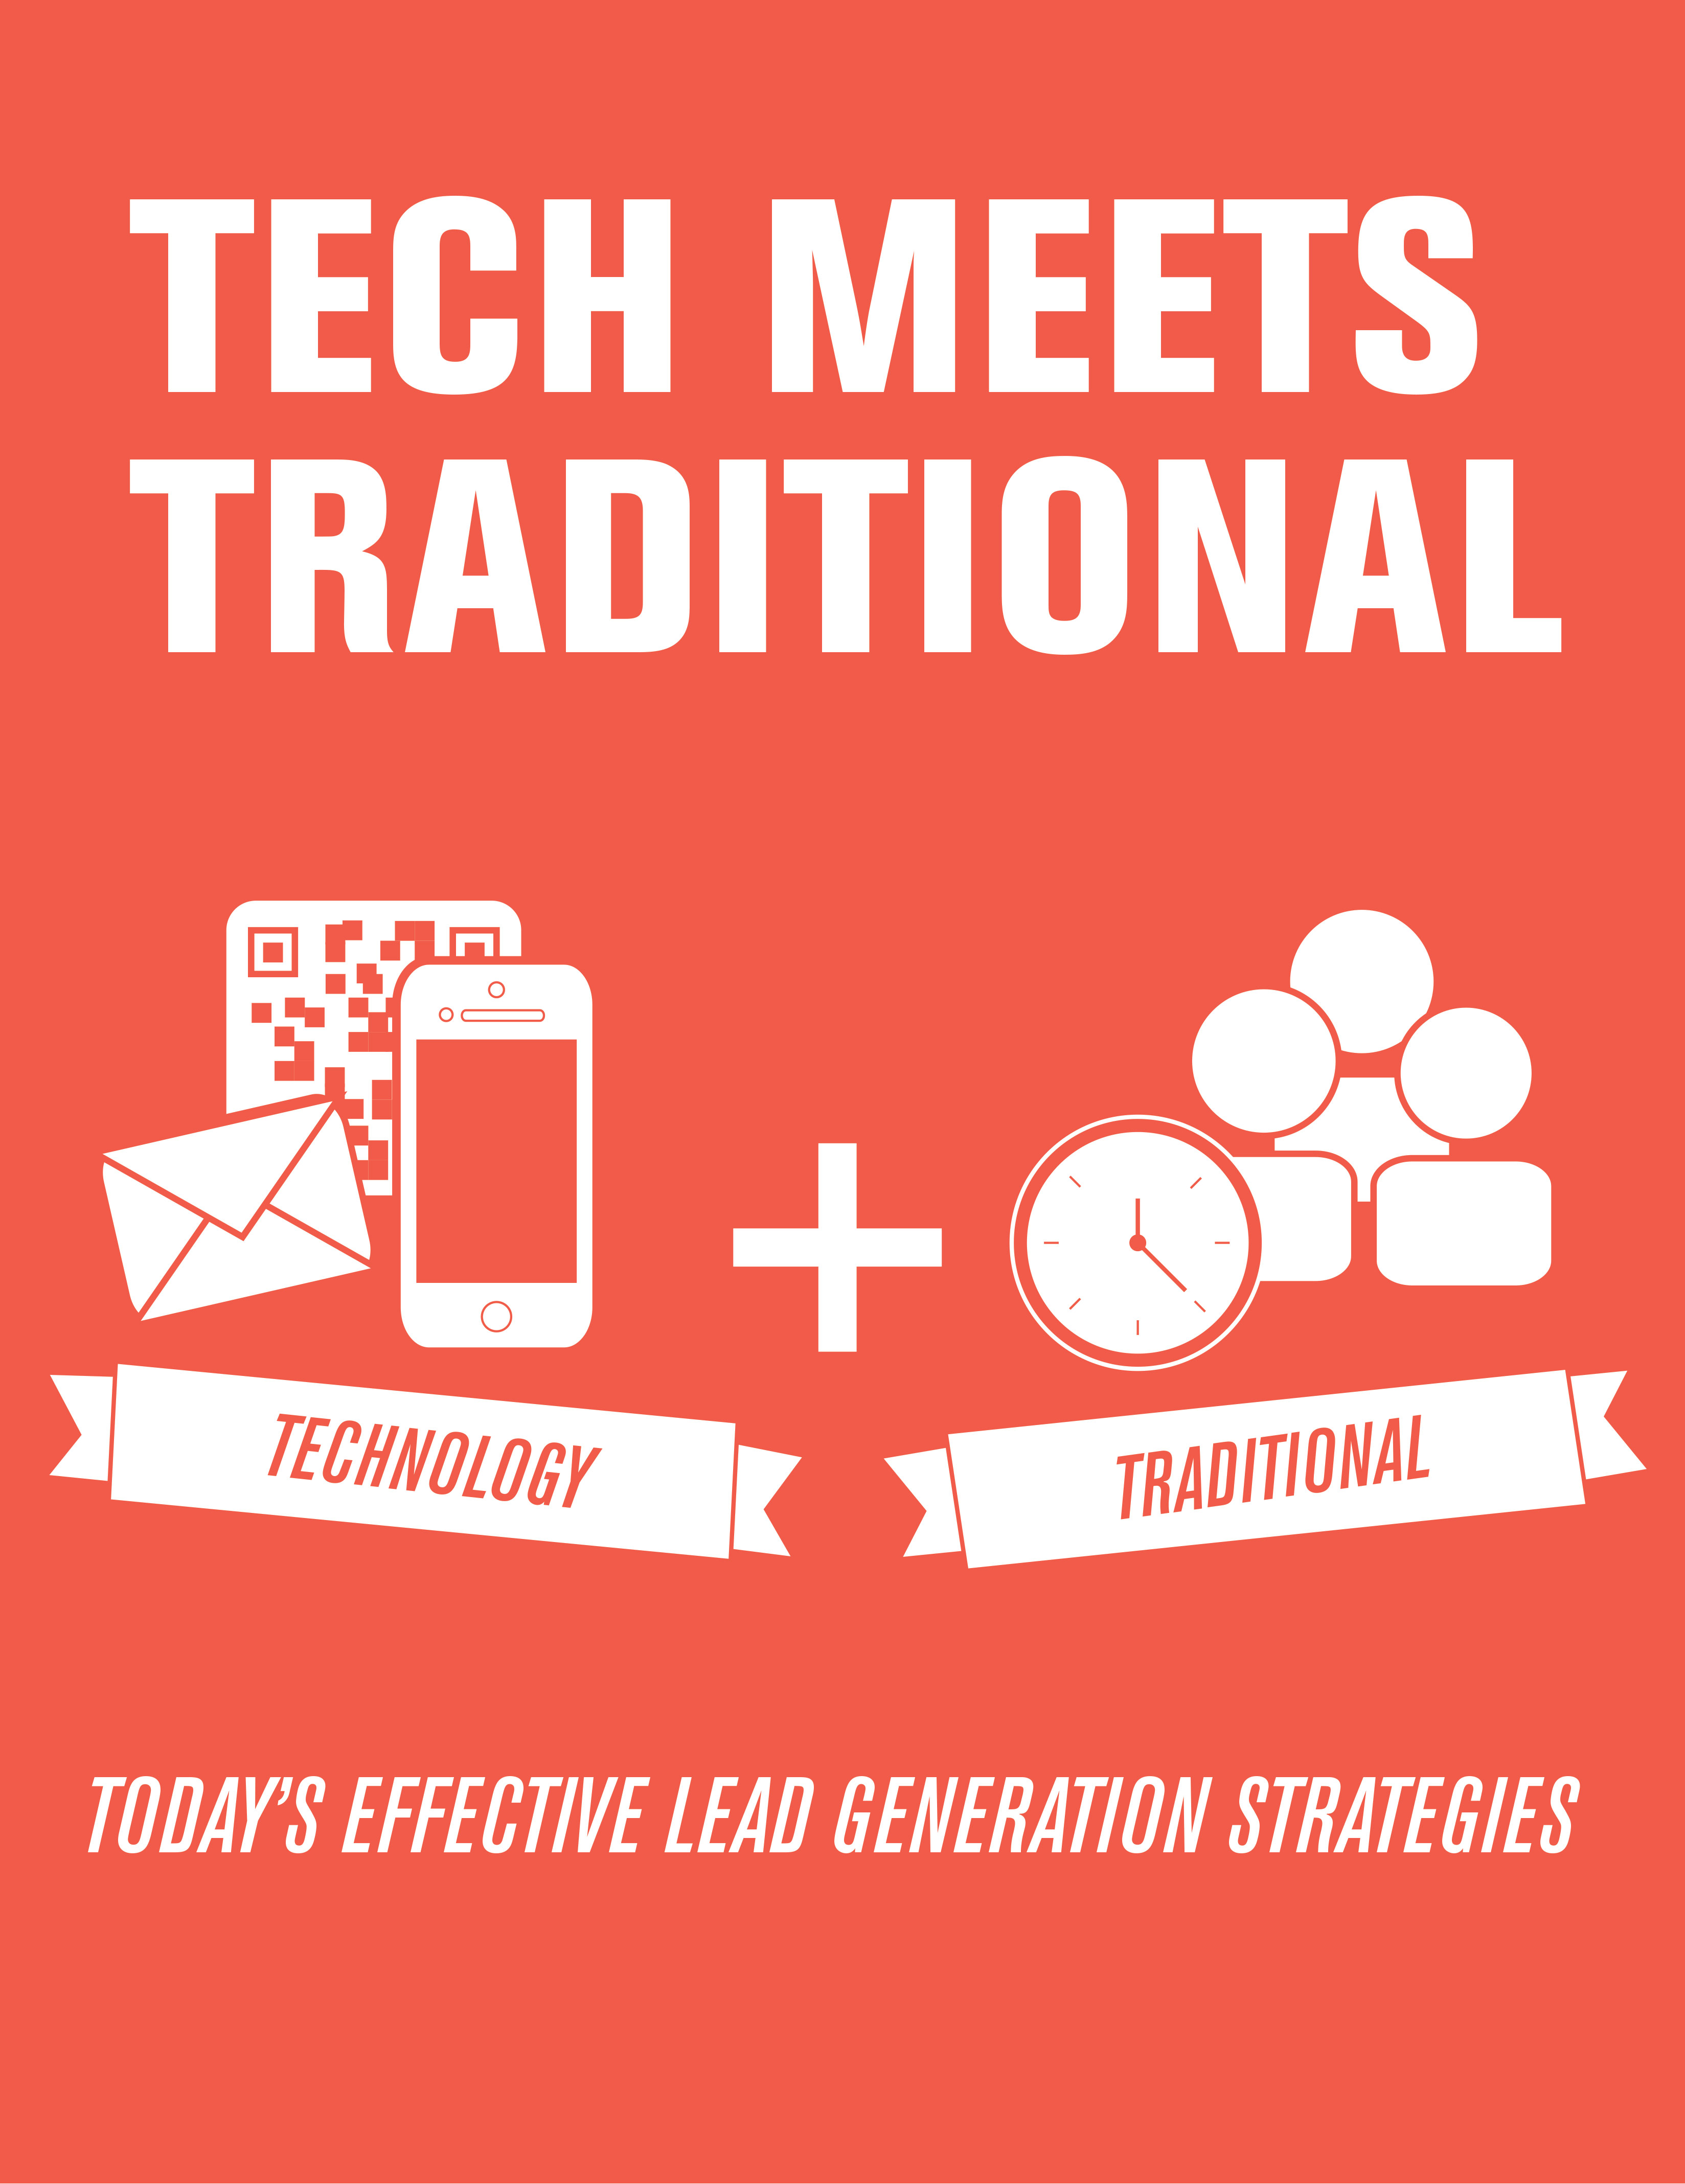 Tech Meets Traditional: Today’s Effective Lead Generation Strategies - 8.18.14